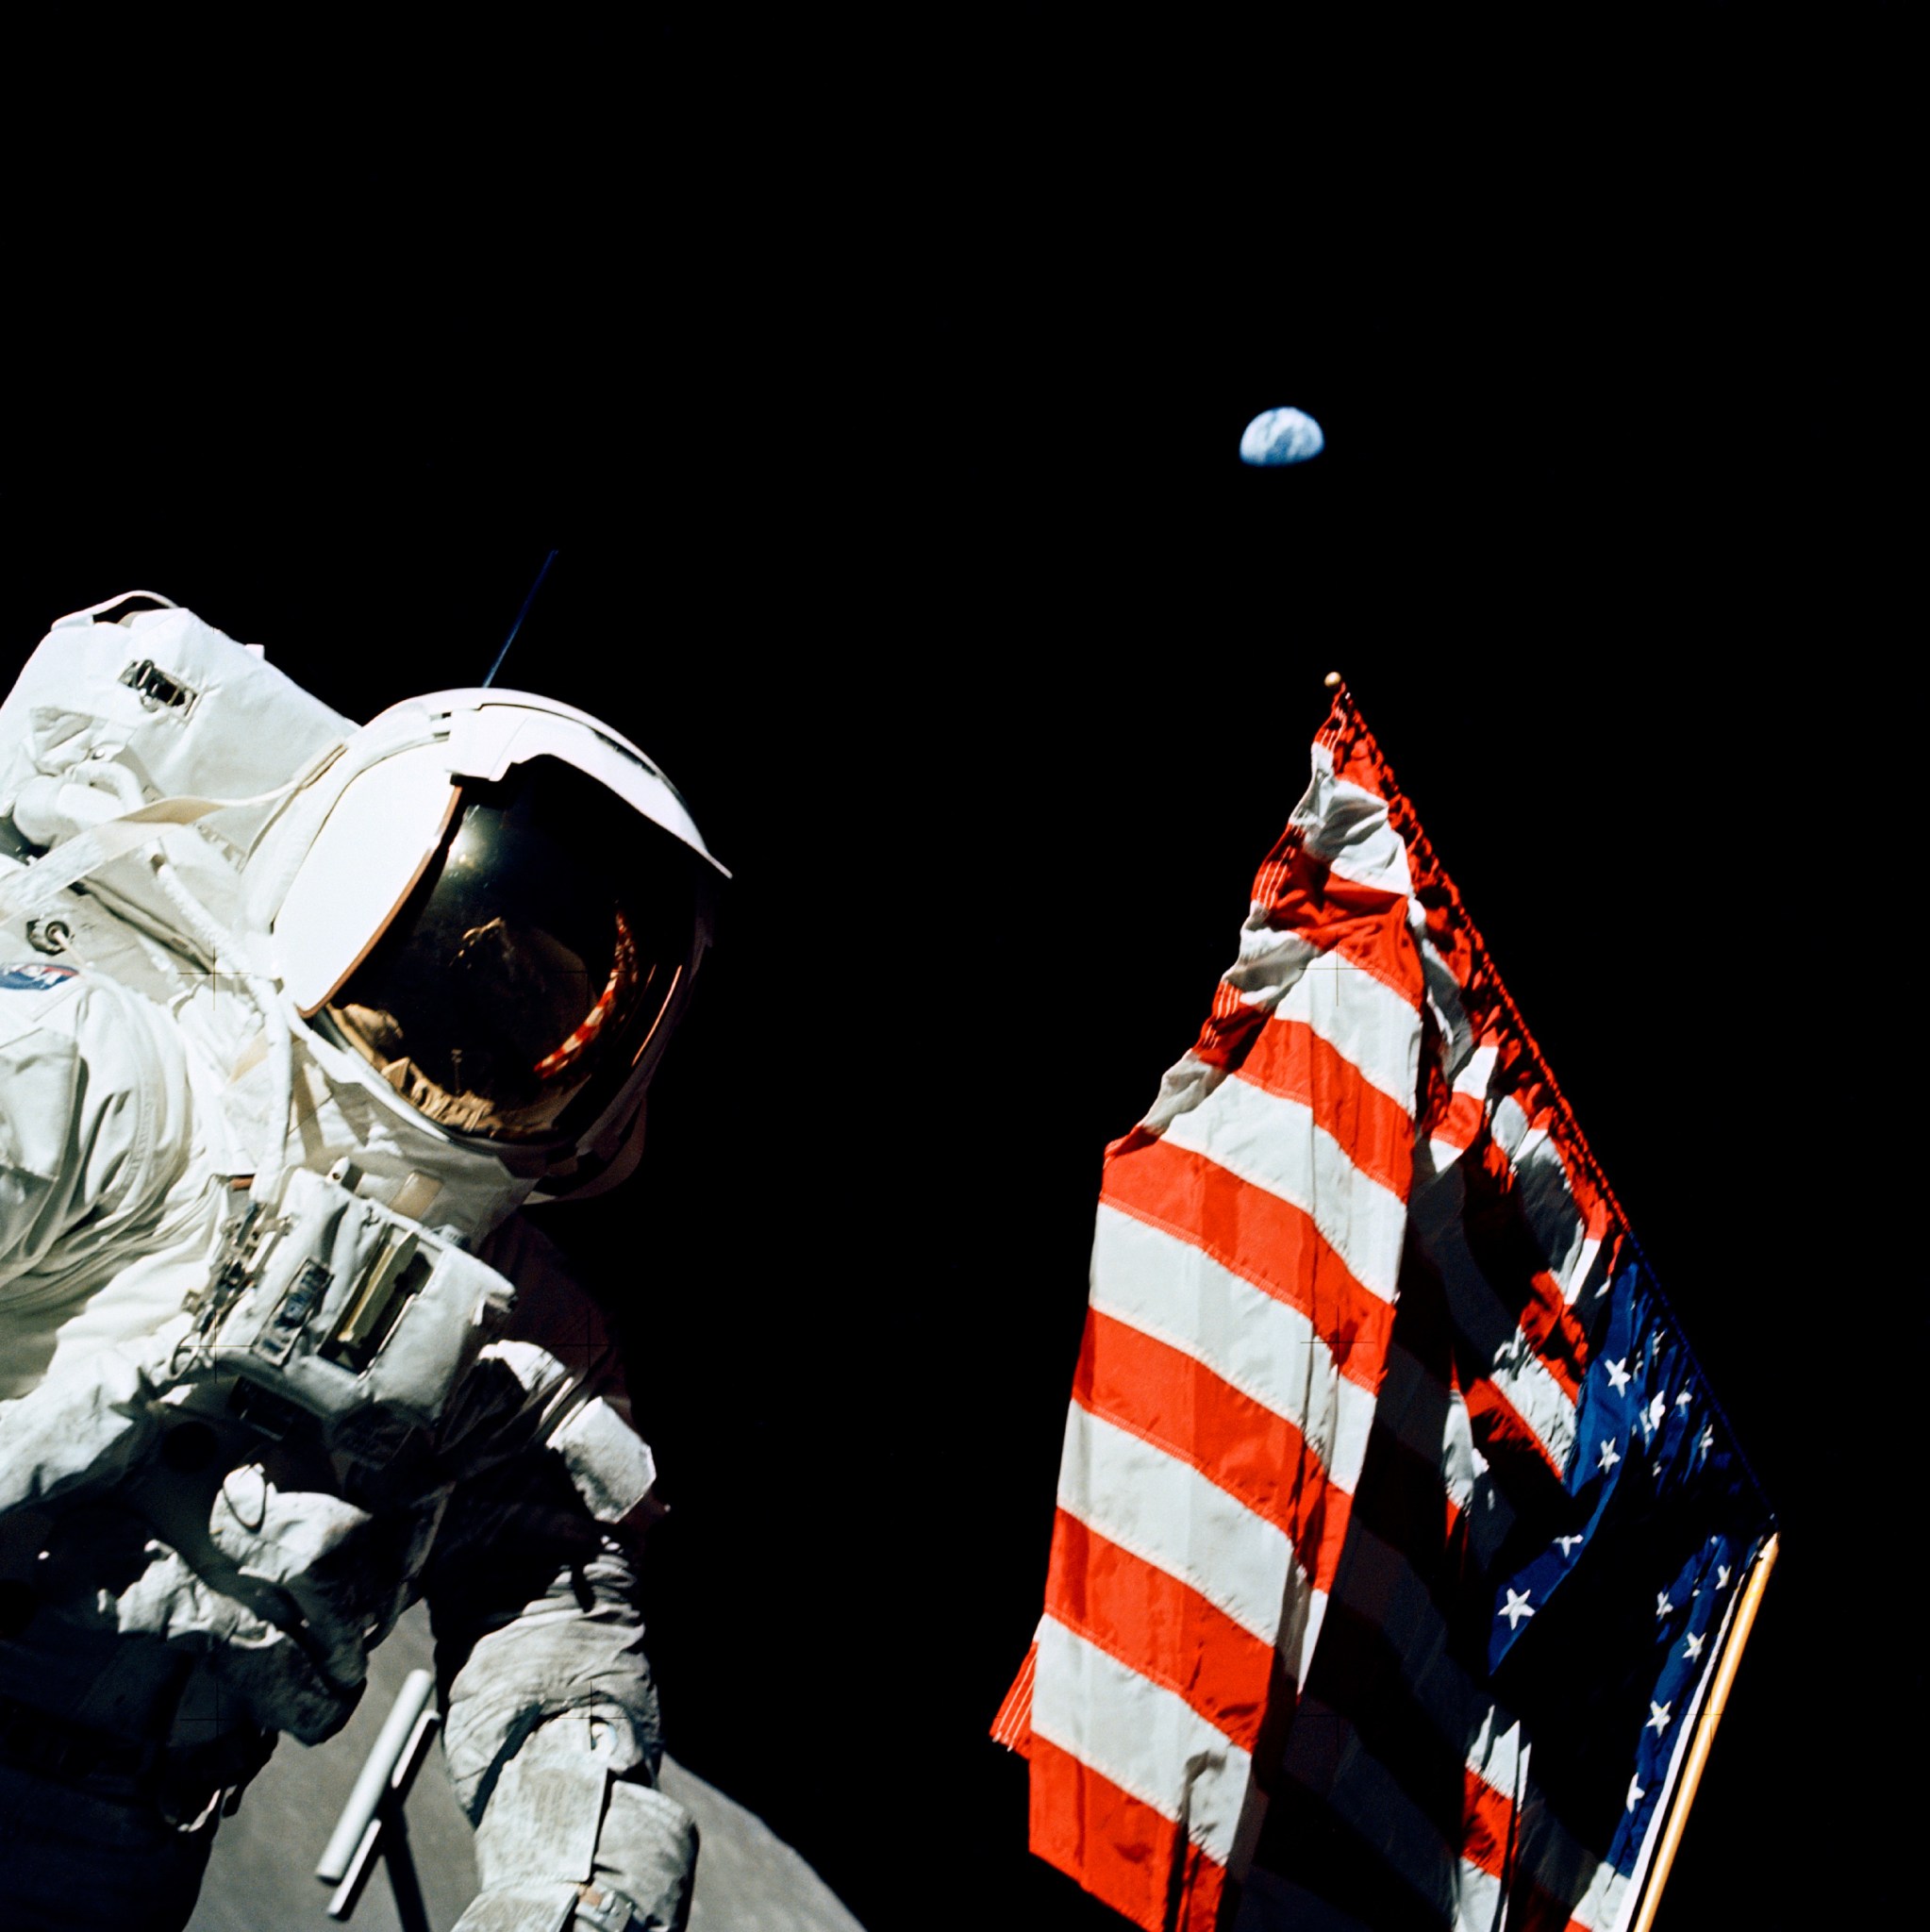 Geologist-Astronaut Harrison Schmitt, Apollo 17, is photographed next to the American Flag during final Moon shot. Earth is visible as a tiny blue dot in the distance. 